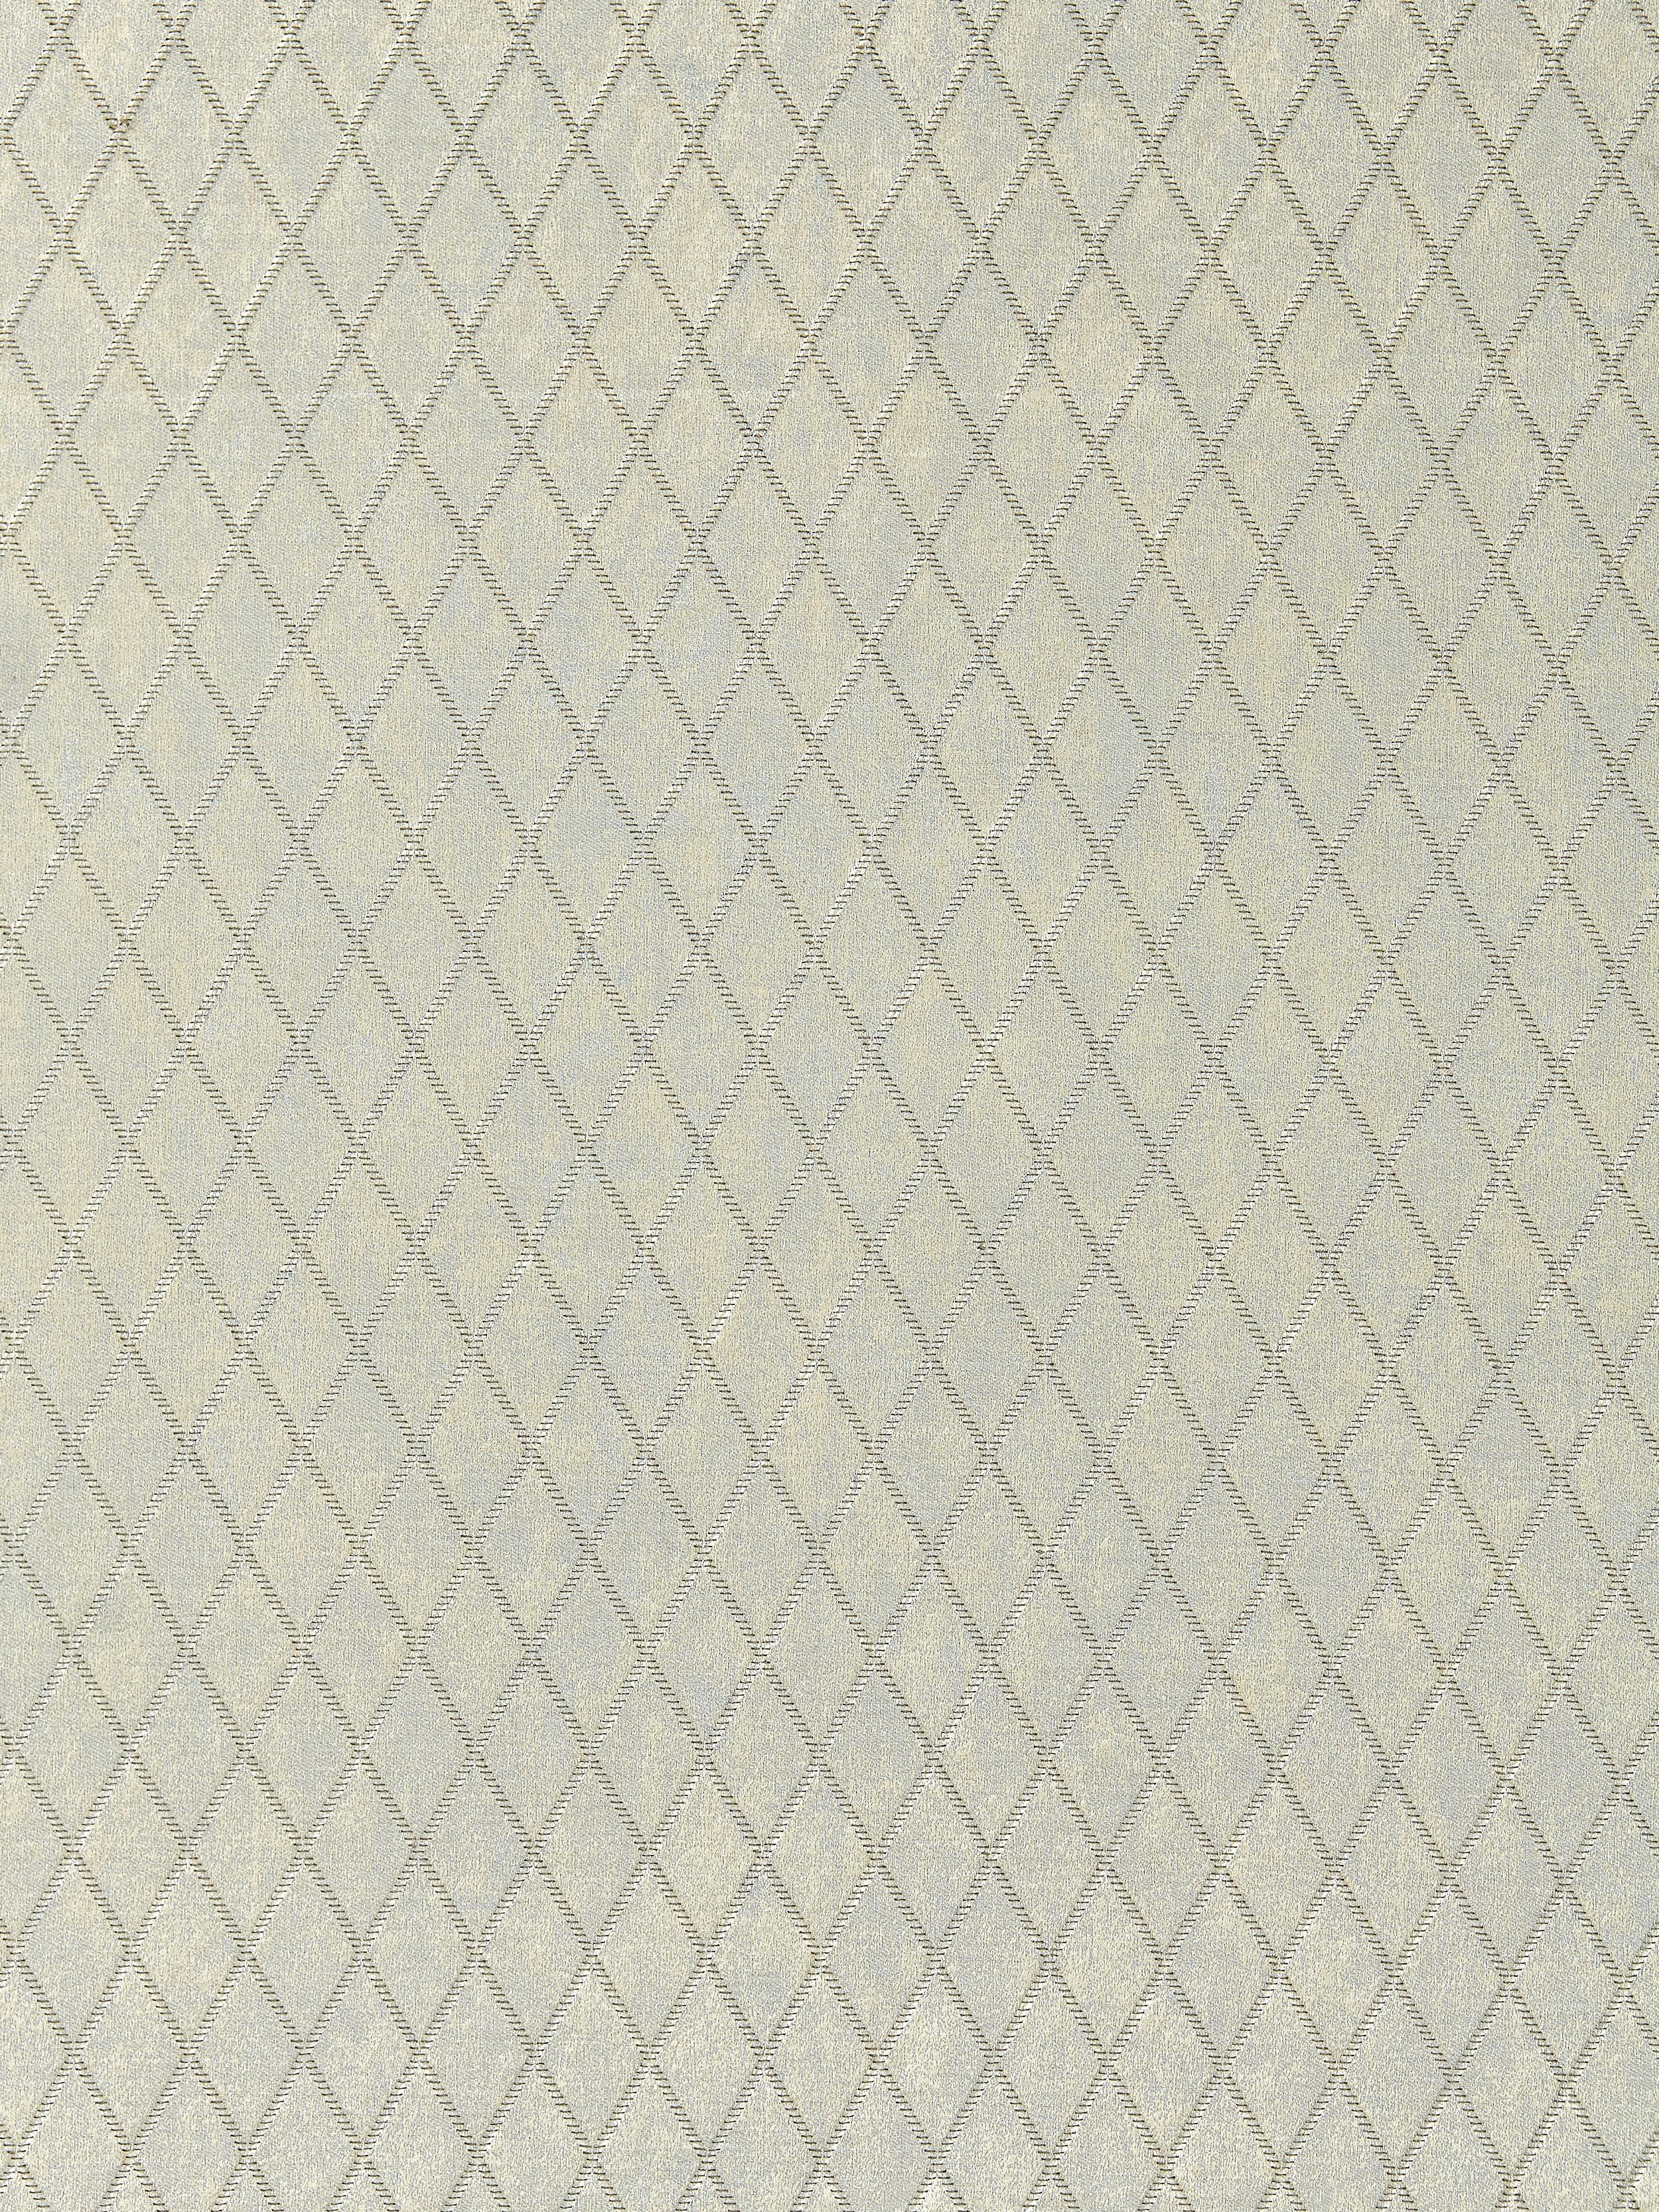 Diamond Weave fabric in pewter color - pattern number SC 000327143 - by Scalamandre in the Scalamandre Fabrics Book 1 collection